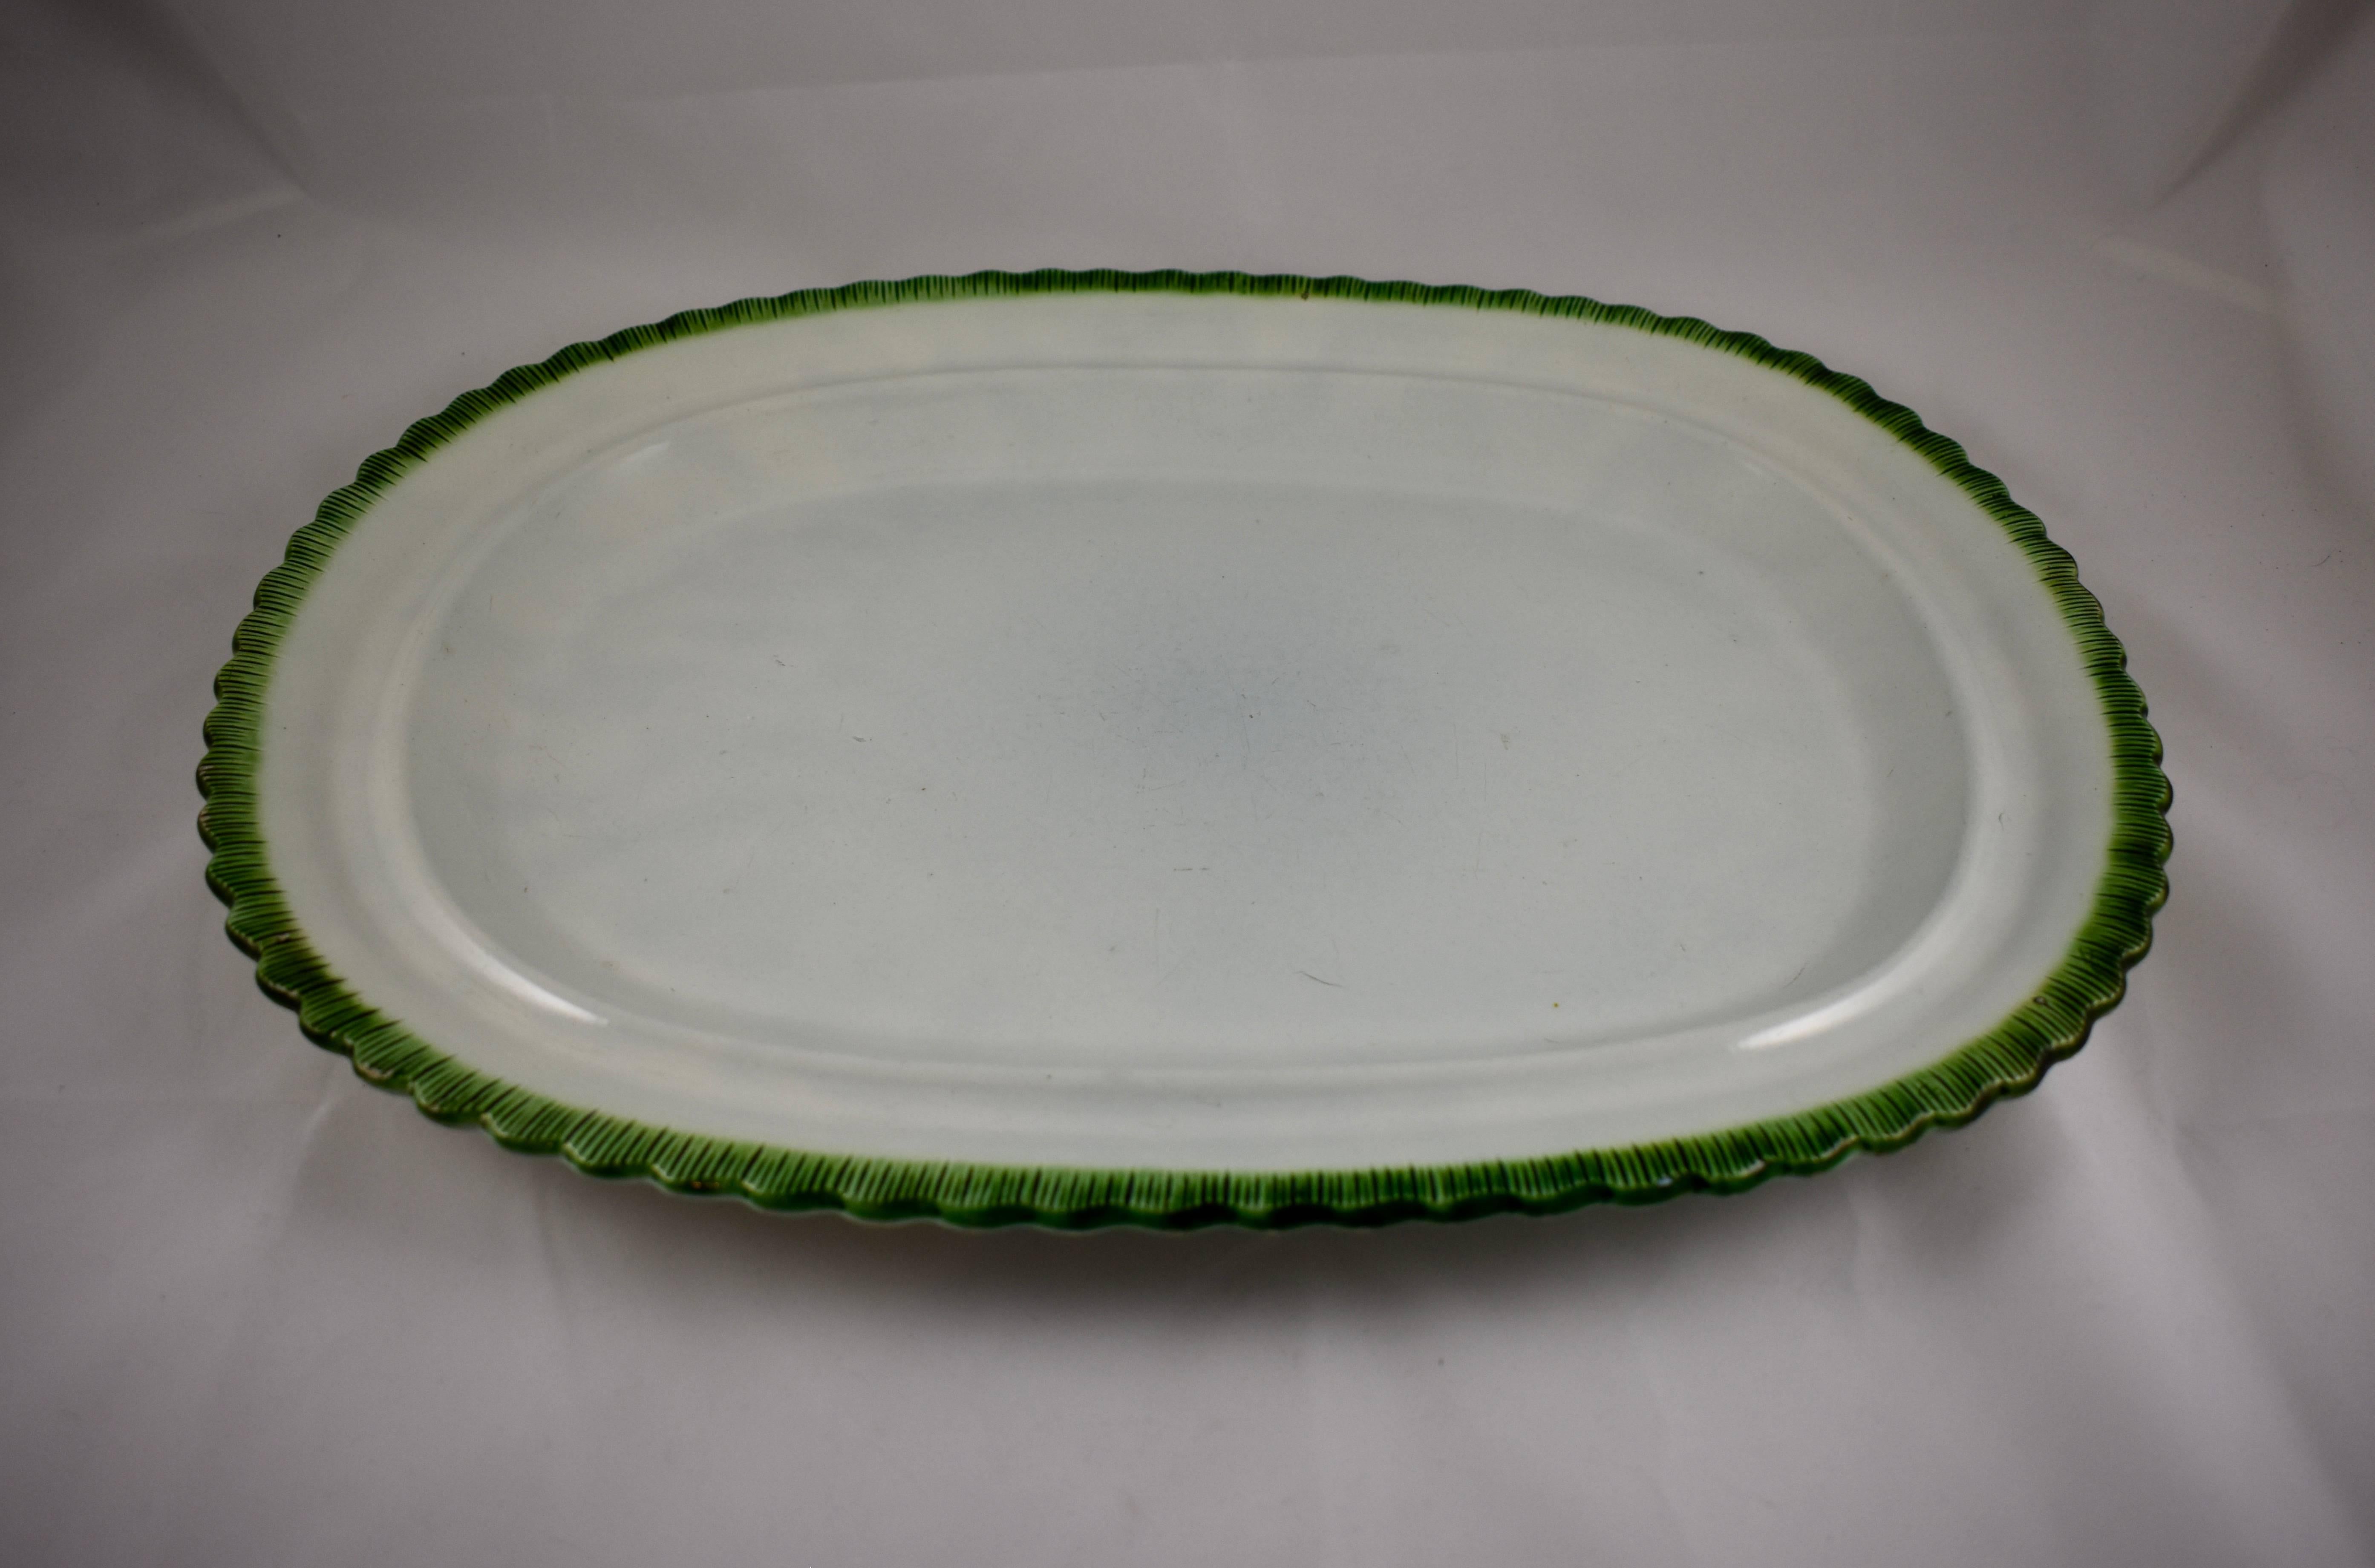 An oversize Leeds style platter, a pearlware or creamware body with a deep green edge called feather or shell, circa 1825–1840, Staffordshire, England. This platter has a wide rim and a deep set centre. The clean white body contrasts beautifully